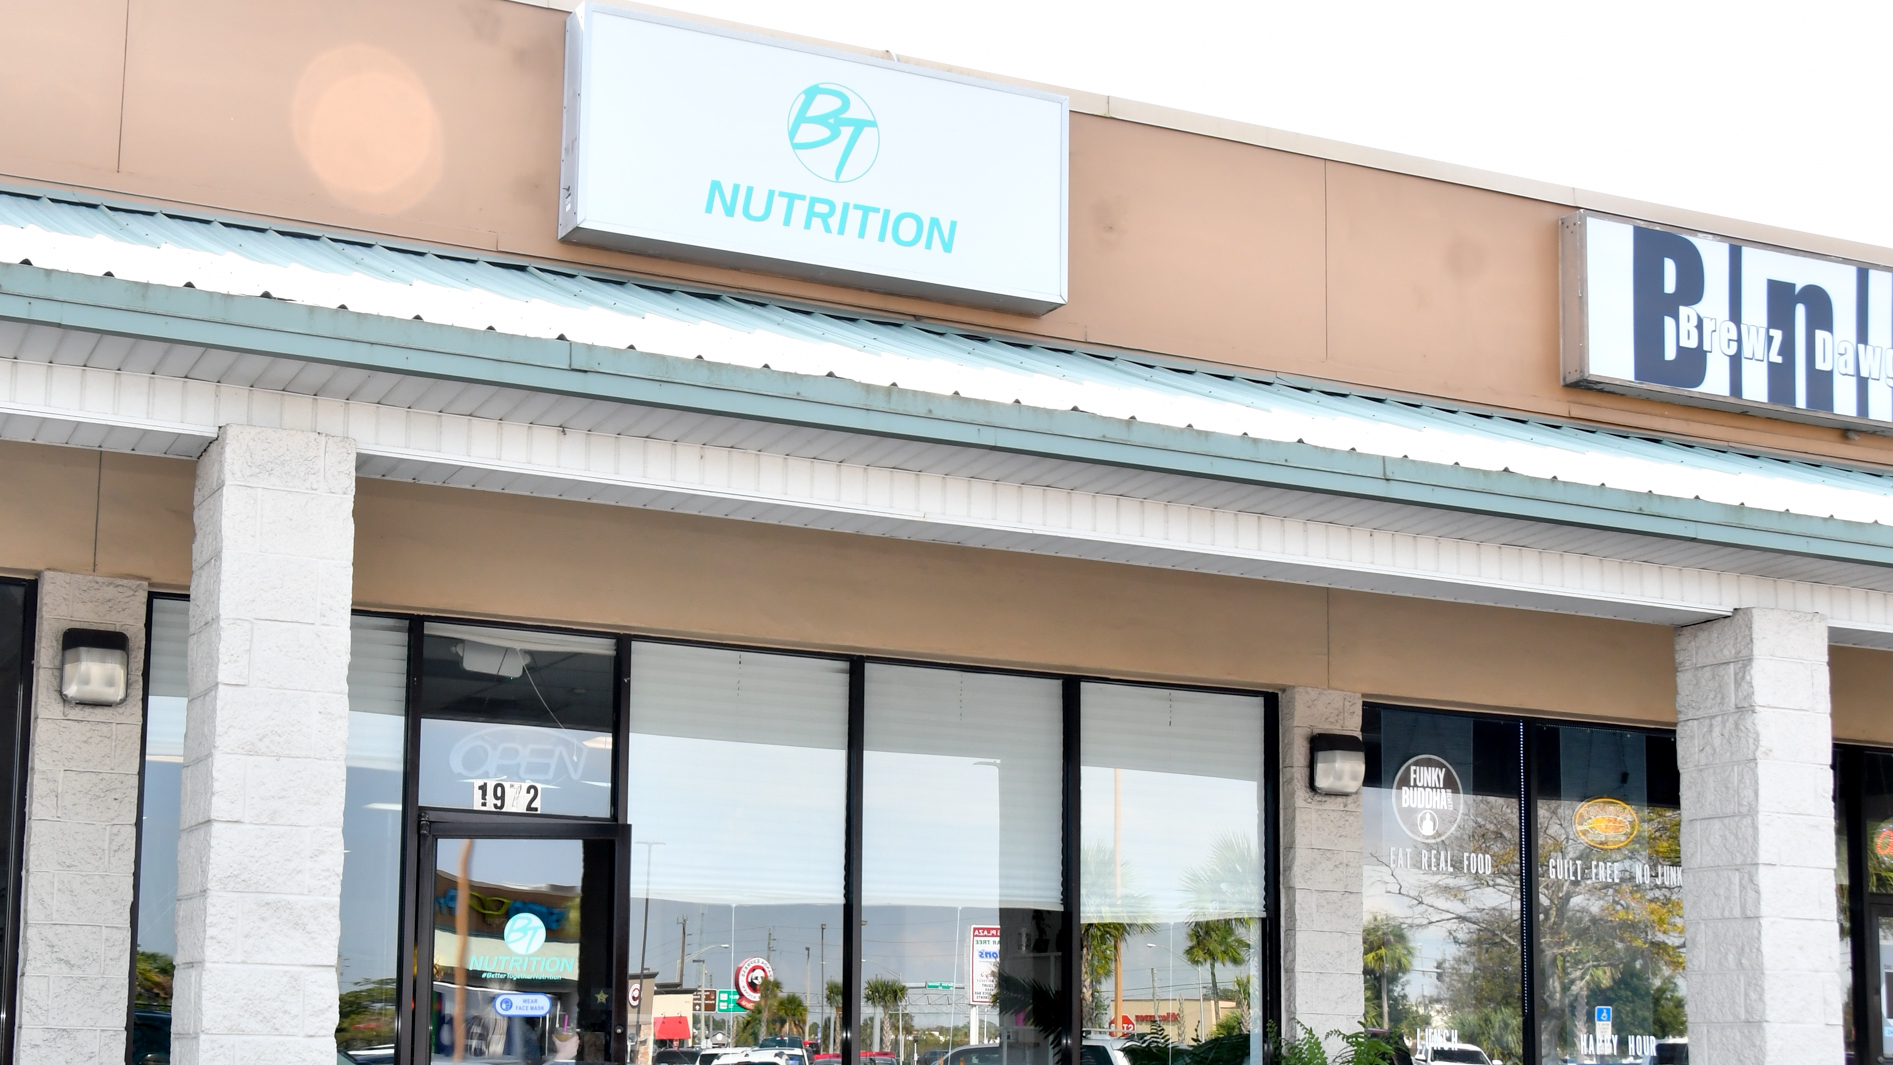 904 Nutrition